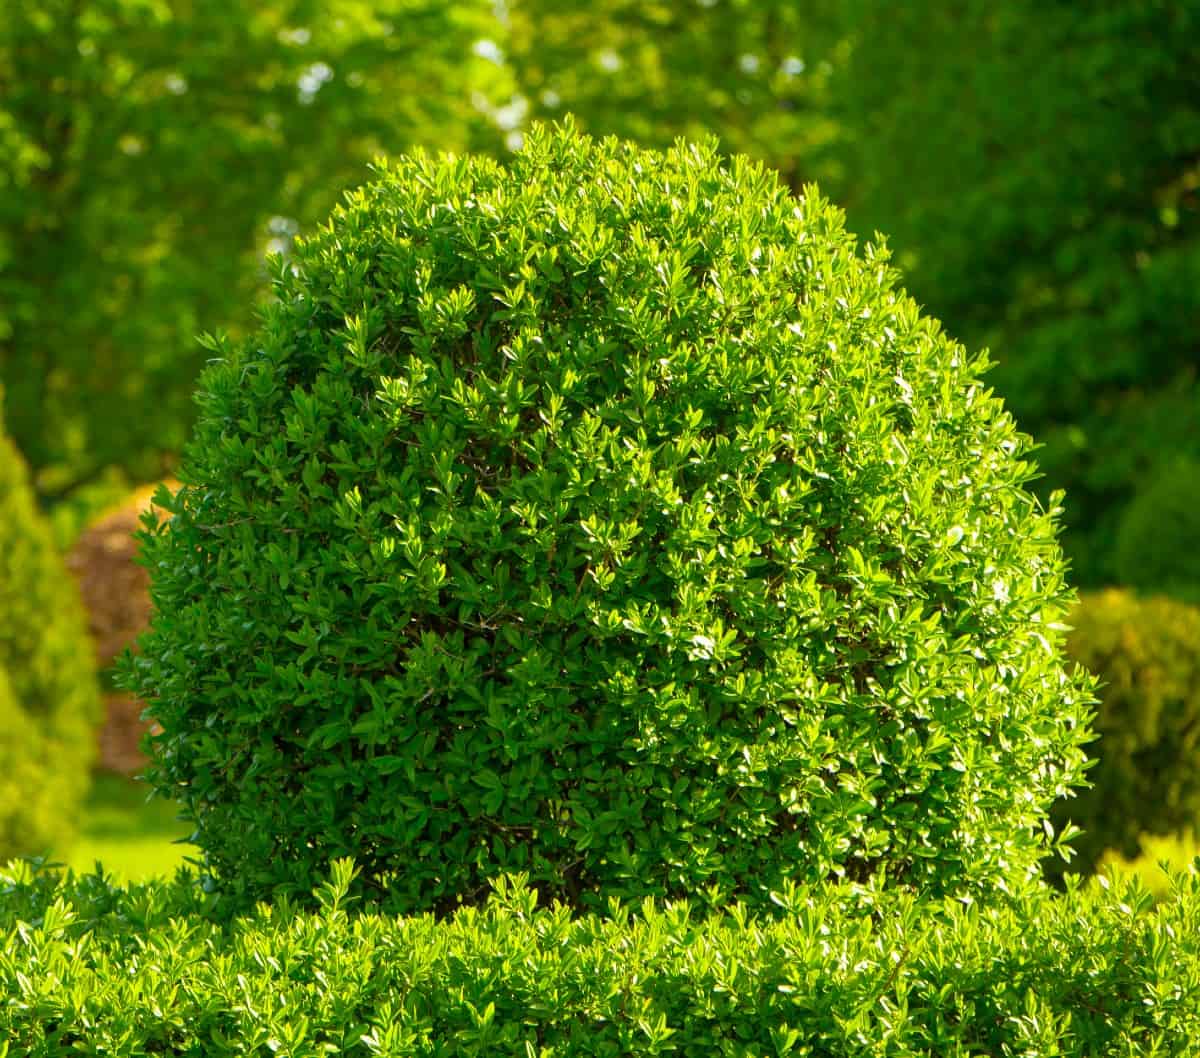 Buxus loves the sun is is low maintenance once established.